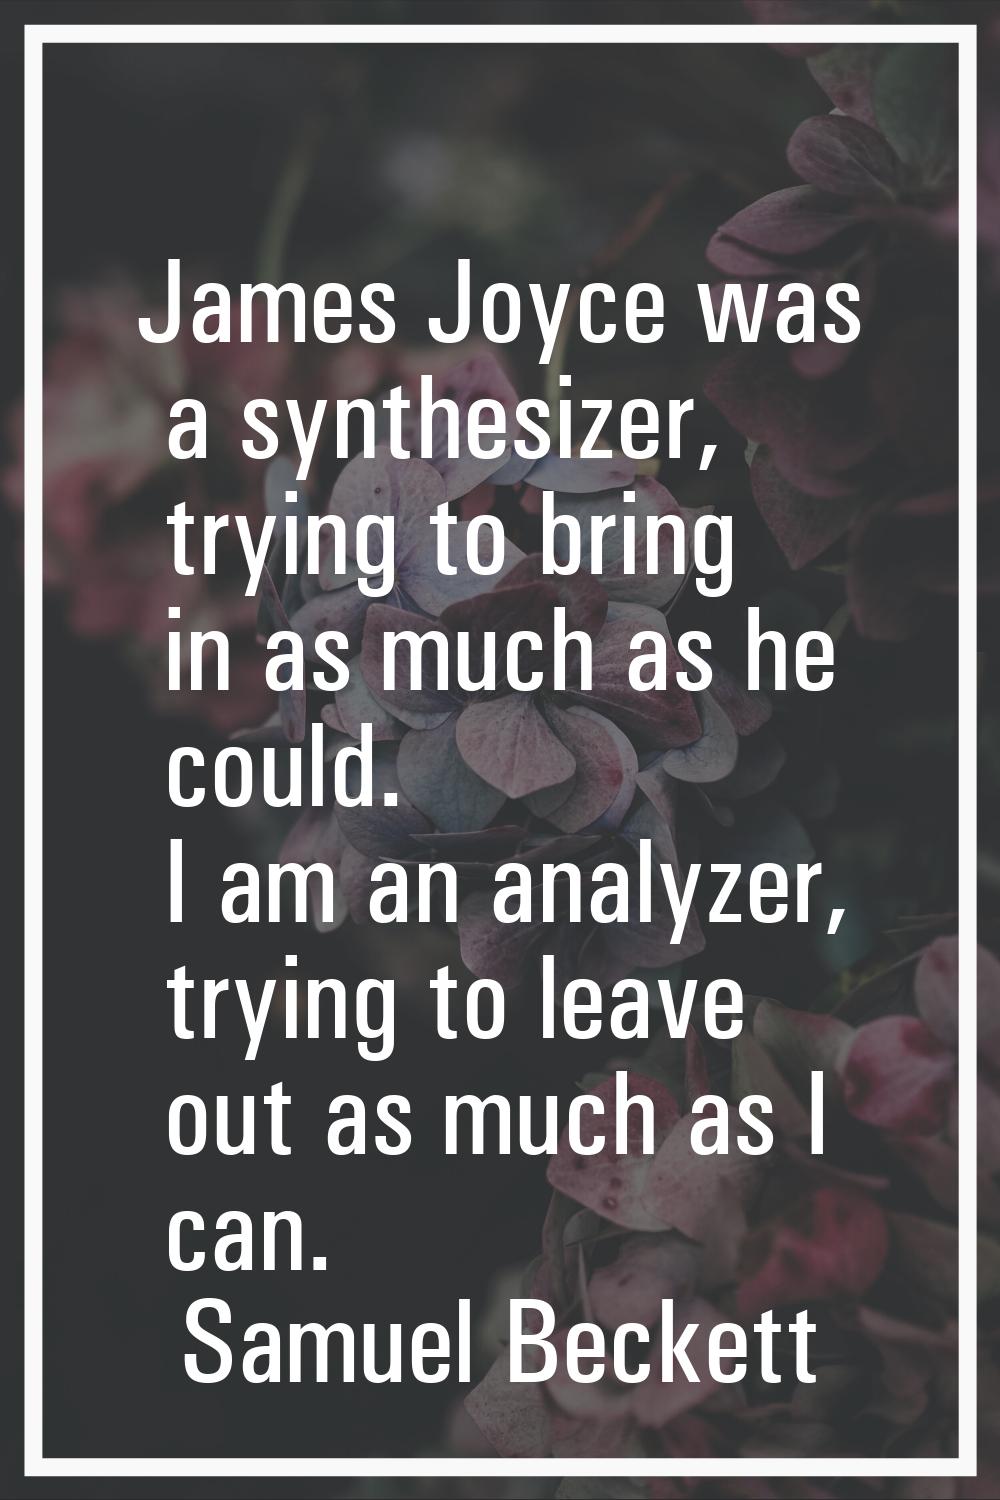 James Joyce was a synthesizer, trying to bring in as much as he could. I am an analyzer, trying to 